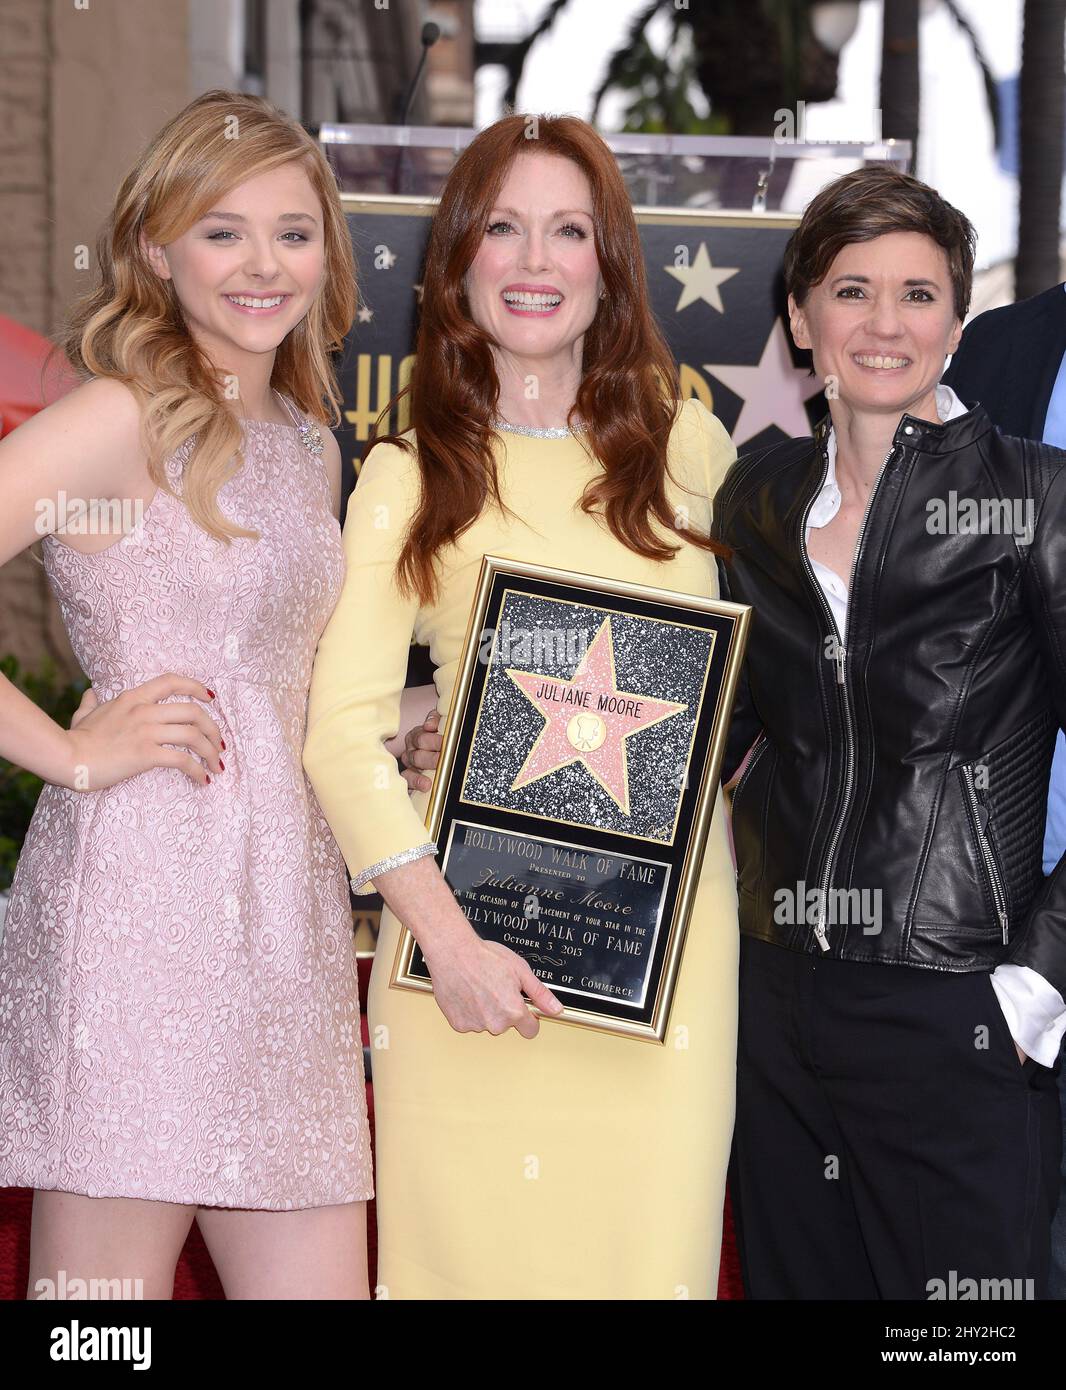 Julianne Moore, Chloe Grace Moretz and Kimberly Peirce at the star for :  Julianne Moore honored with a star on the Hollywood Walk Of fame in Los  Angeles.Julianne Moore, Chloe Grace Moretz